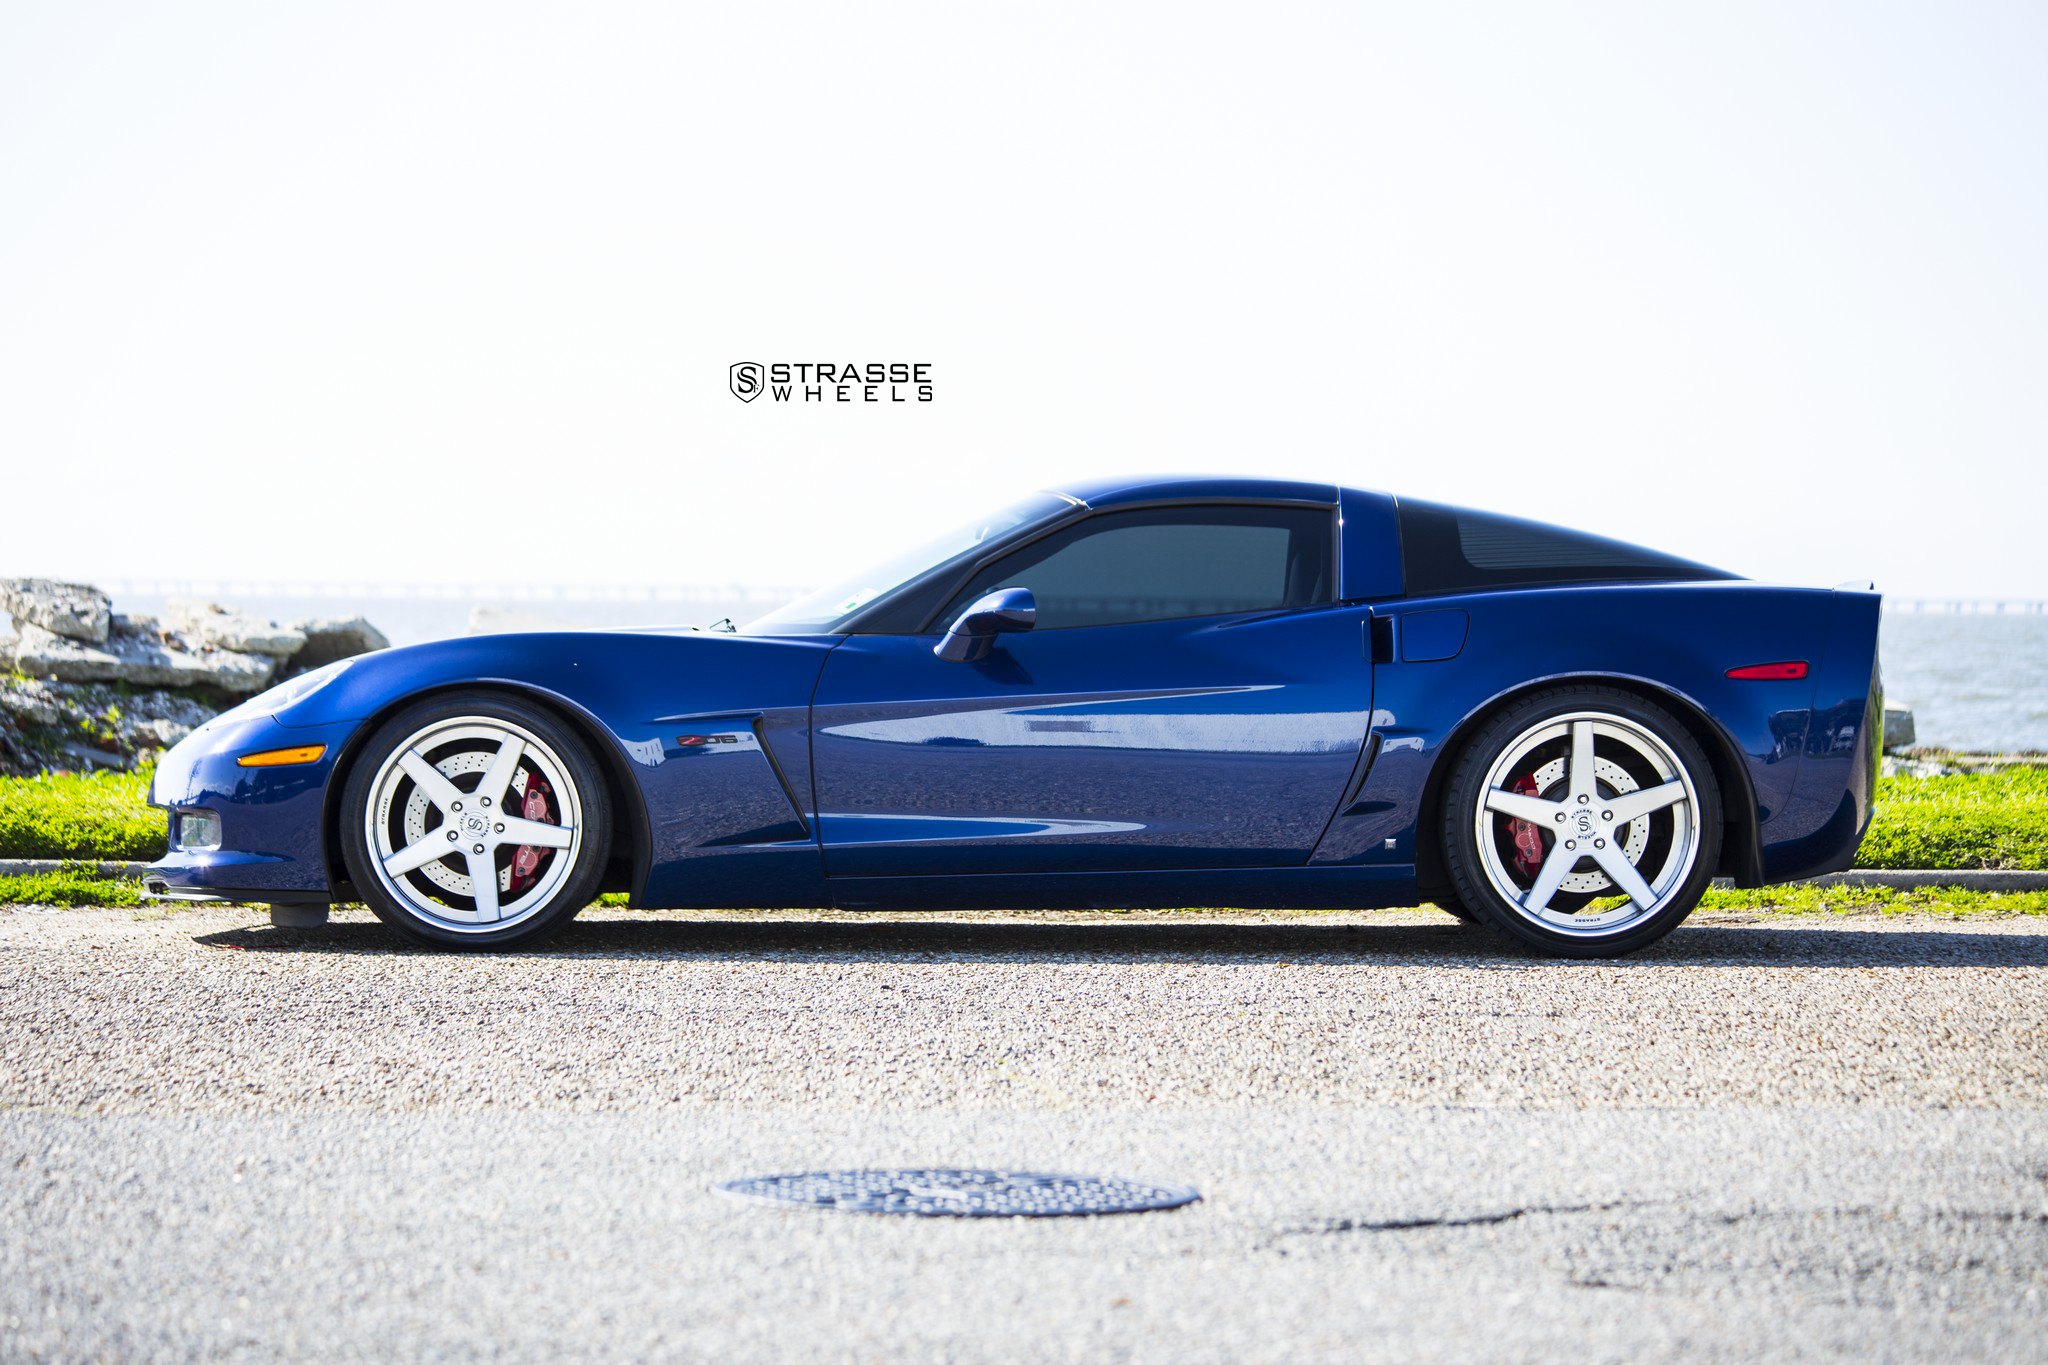 Aftermarket Side Skirts on Blue Chevy Corvette - Photo by Strasse Forged